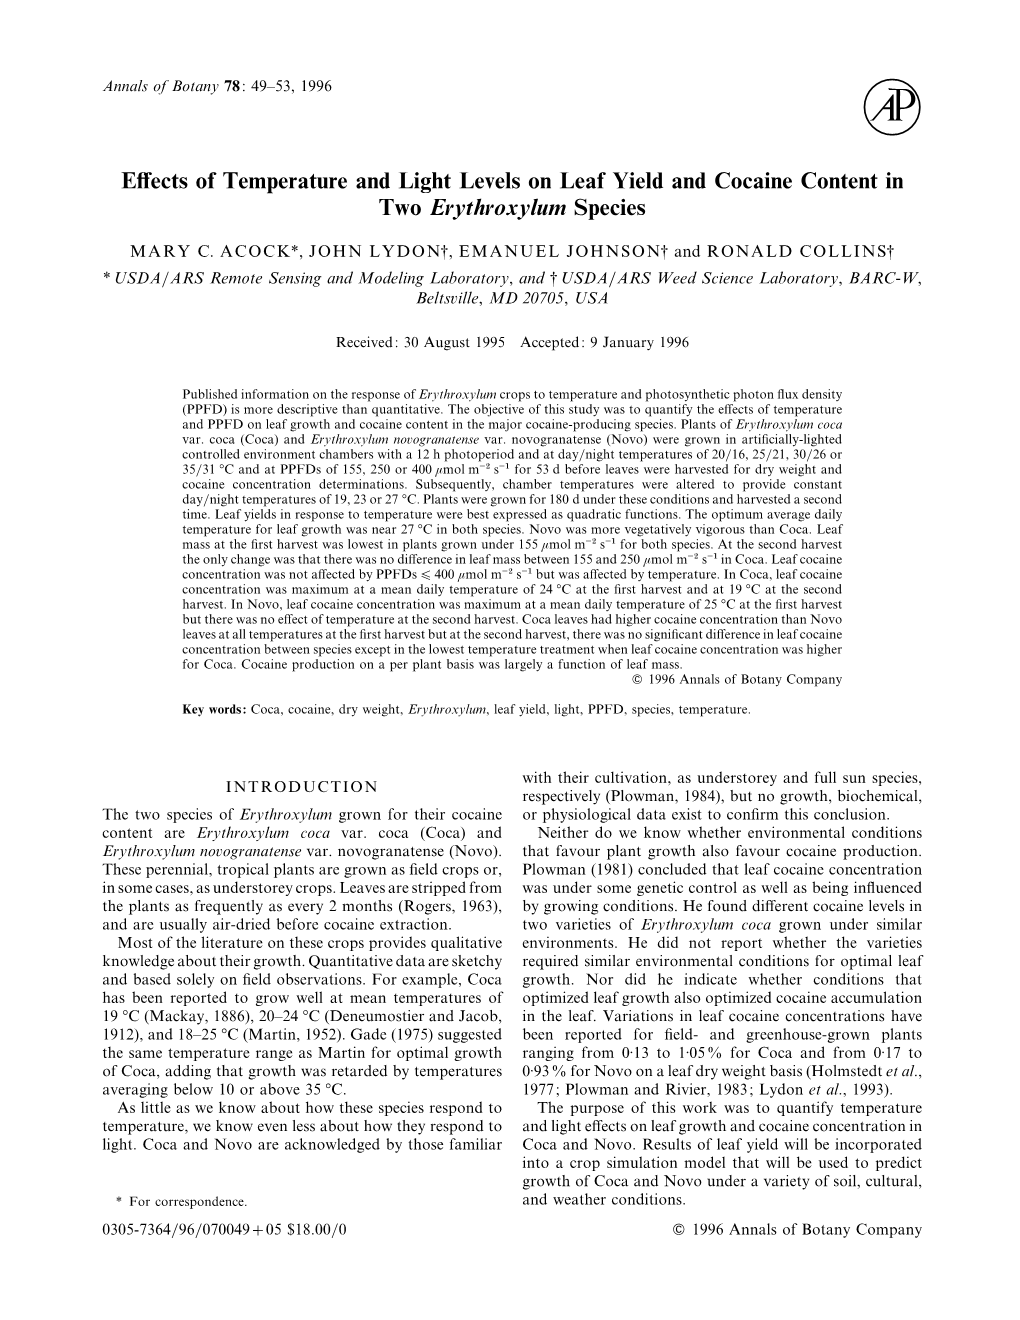 Effects of Temperature and Light Levels on Leaf Yield and Cocaine